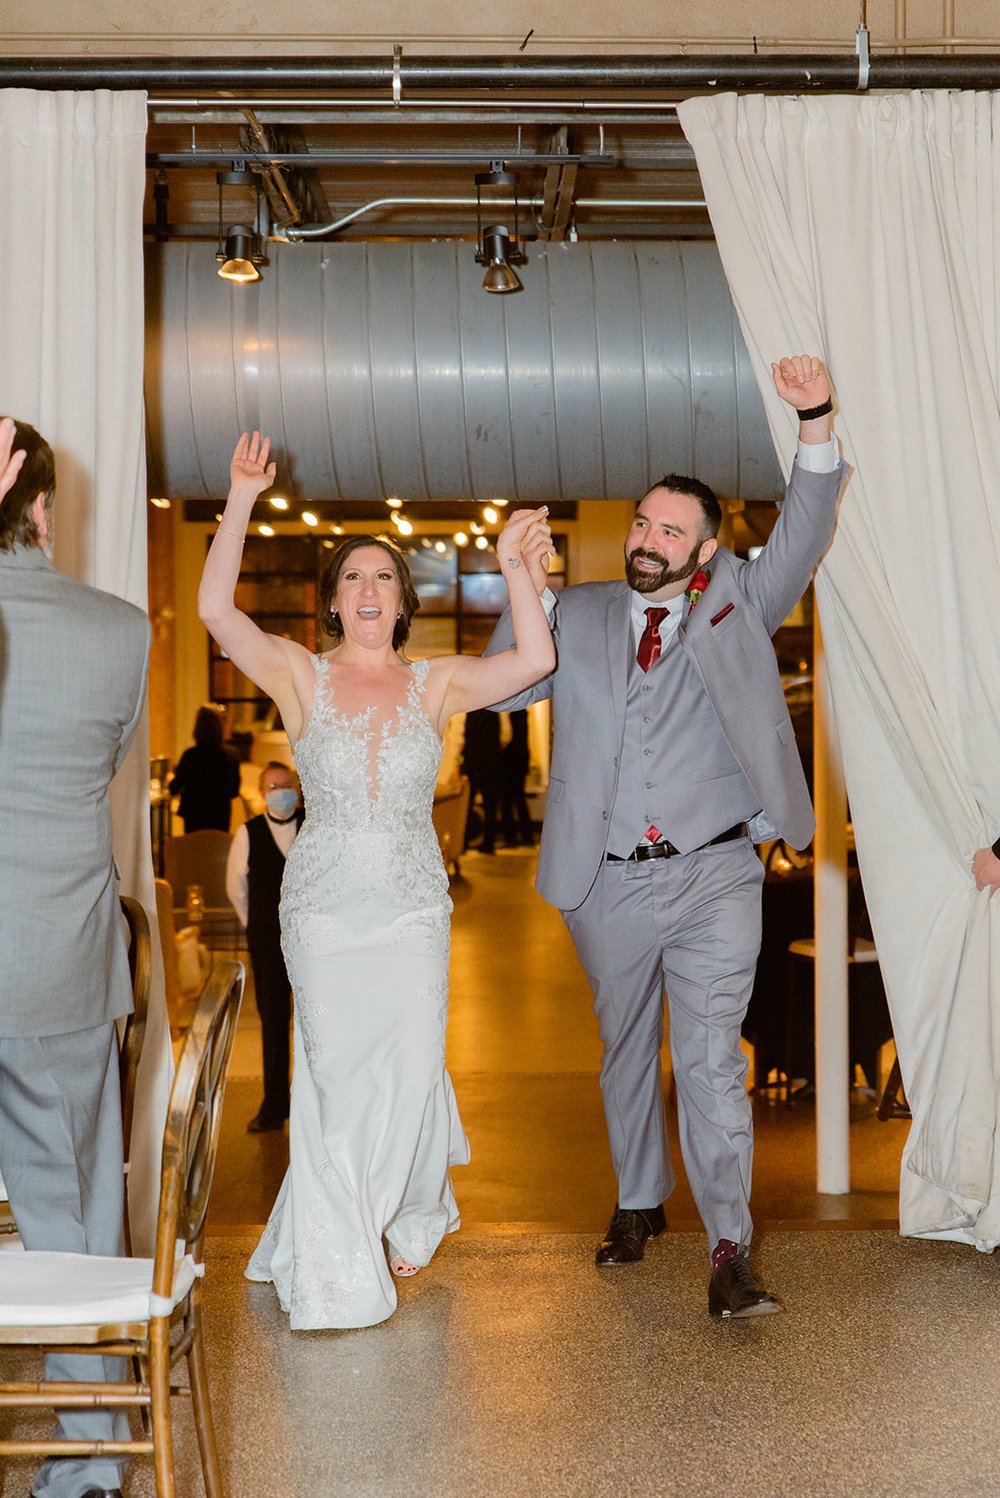 bride and groom entrance for their asheville wedding reception photographed by nick levine photography